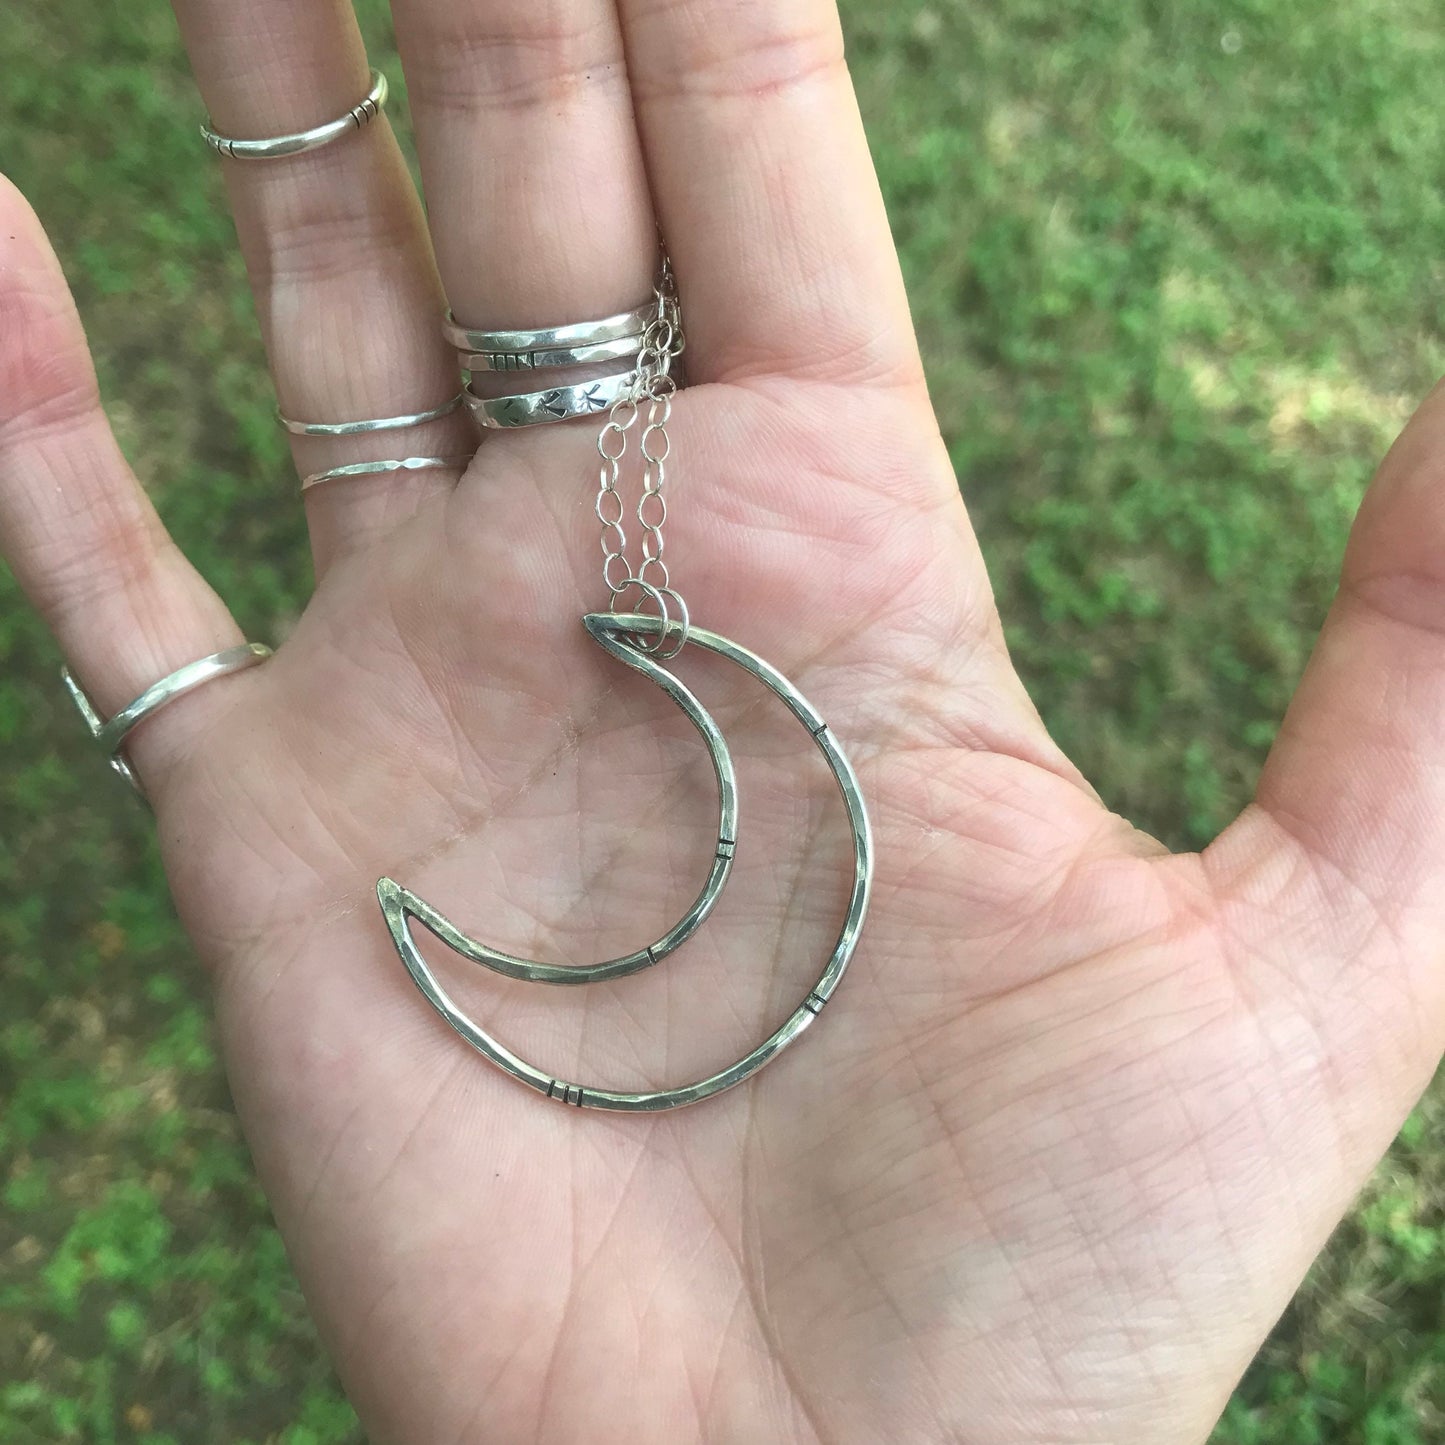 Large Notched Sterling Crescent Moon Necklace - Silver Moon Necklace - Hammered Crescent Moon - Witchy Moon Necklace - Moon Phase Necklace